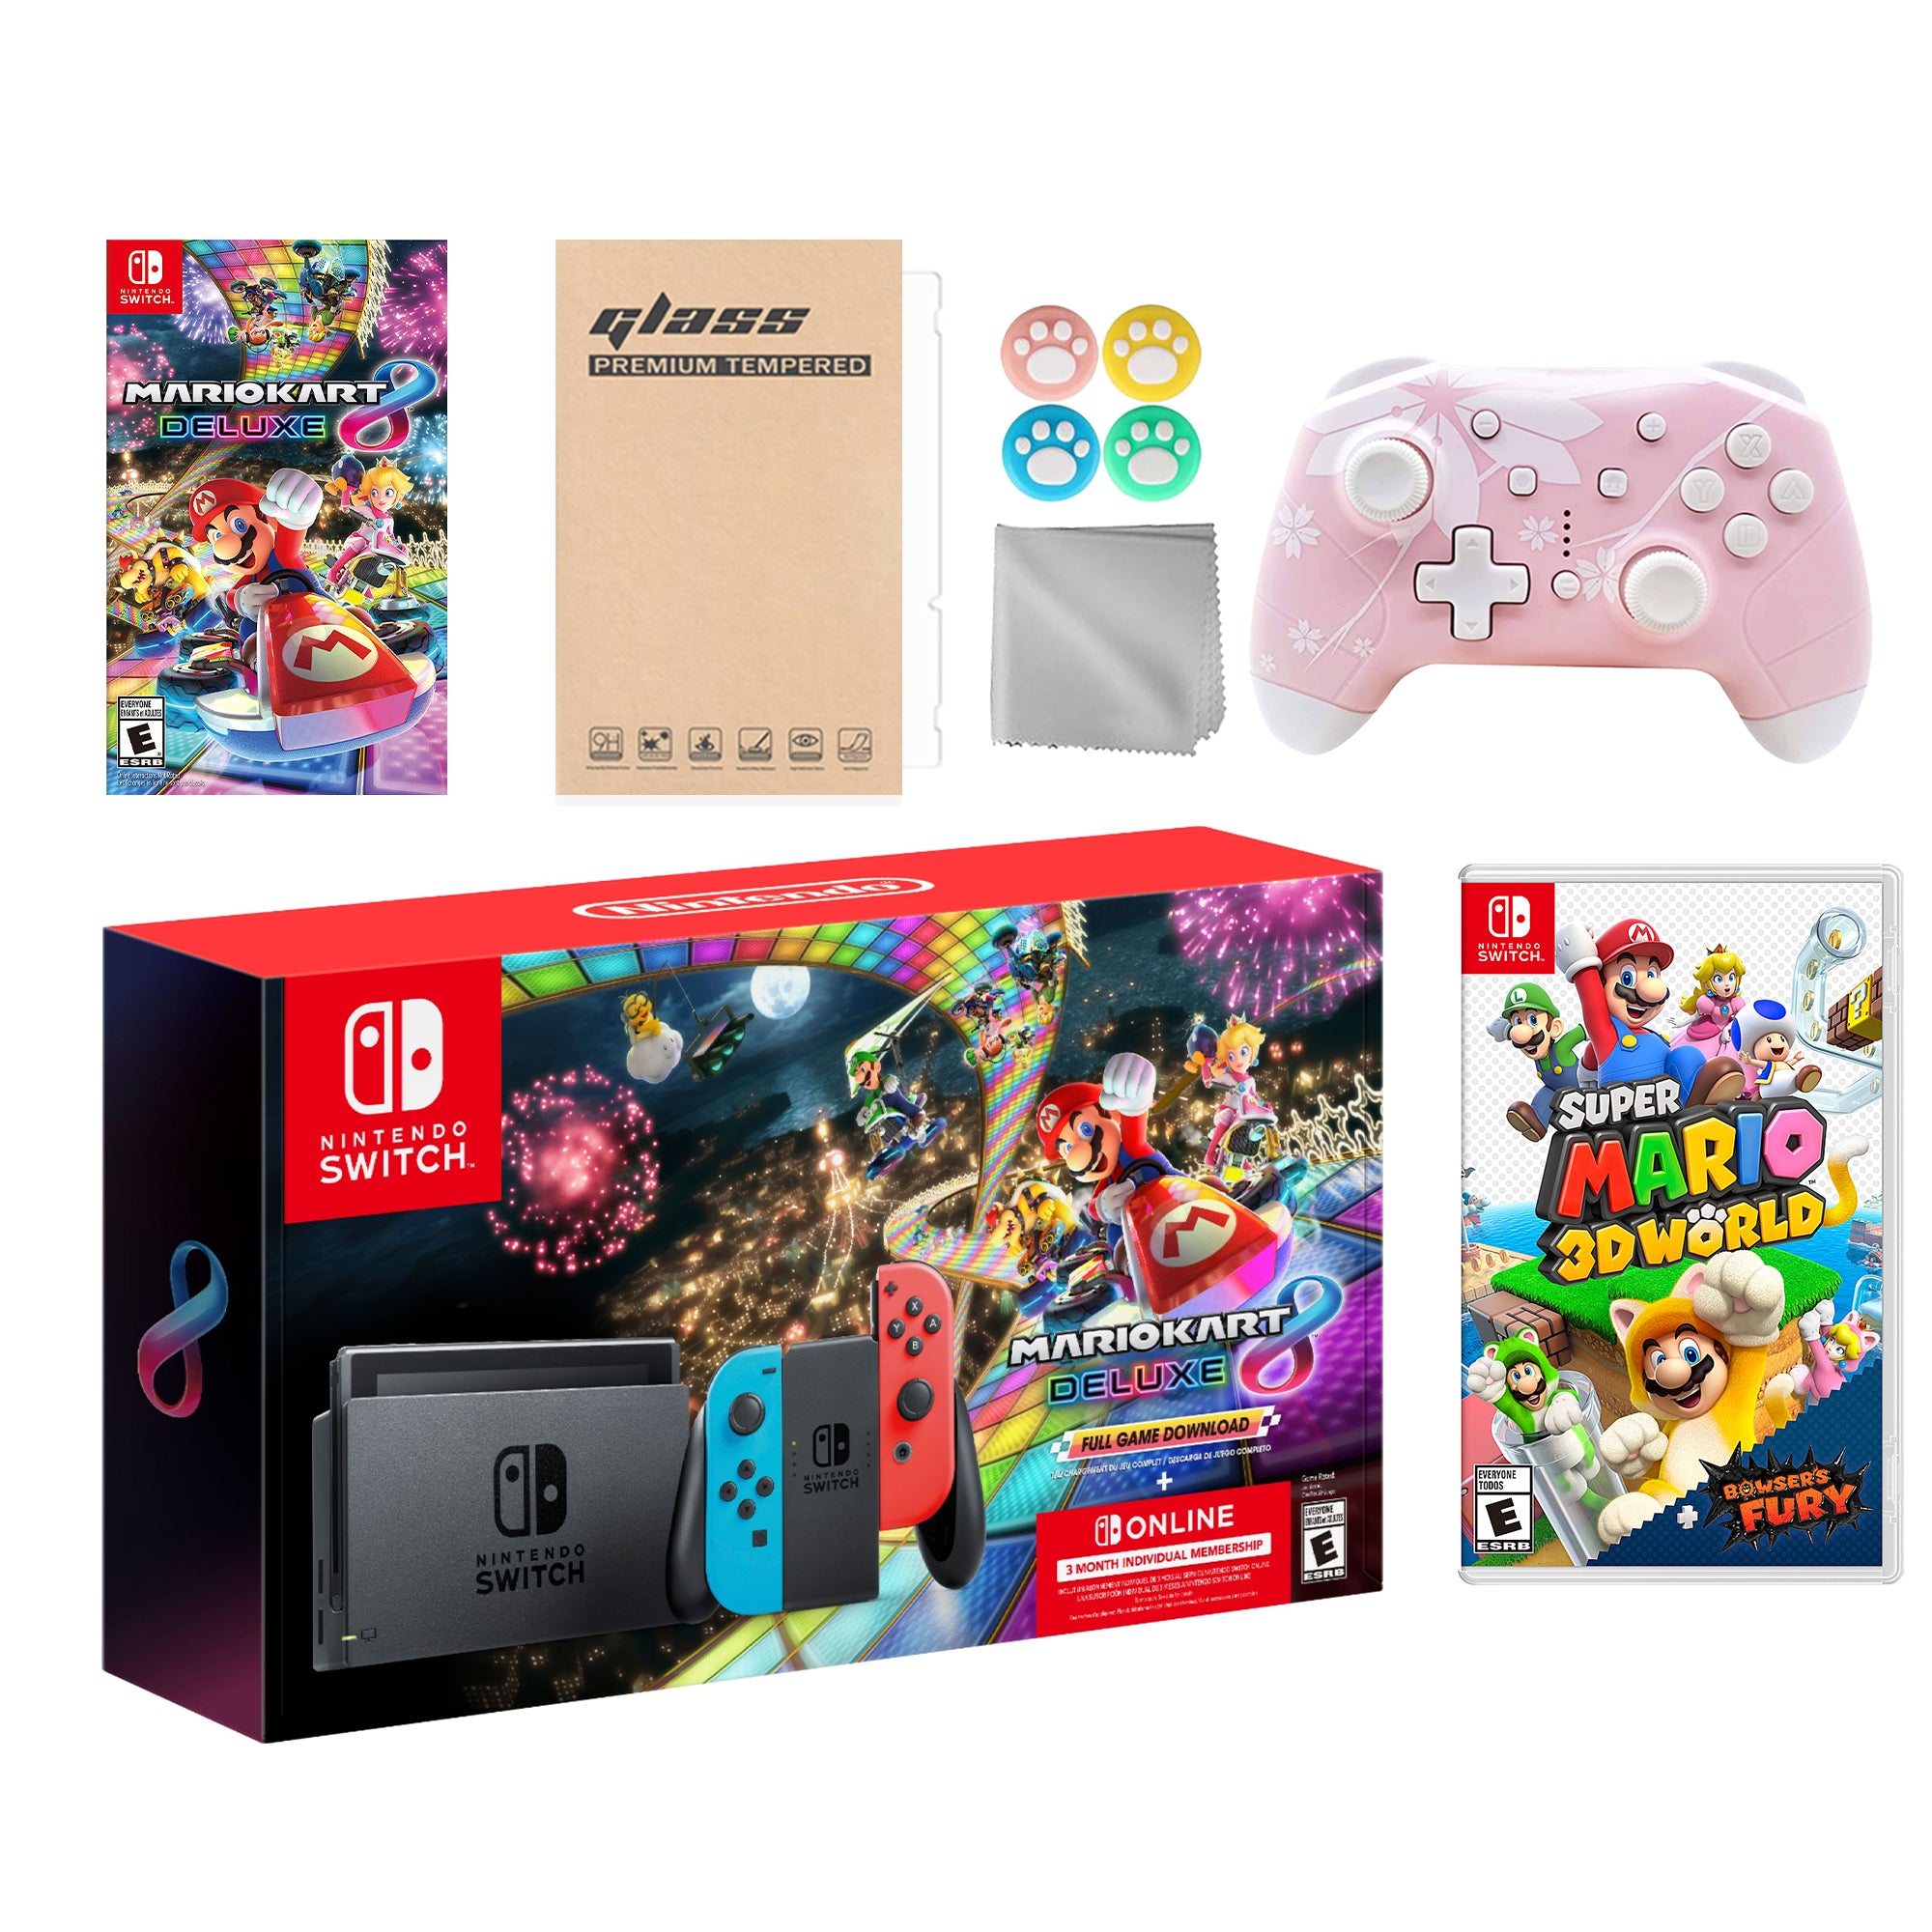 Nintendo Switch Mario Kart 8 Deluxe Bundle: Red Blue Console, Mario Kart 8 & Membership, Super Mario 3D World + Bowser's Fury, Mytrix Wireless Pro Controller Pink Cherry Blossom and Accessories